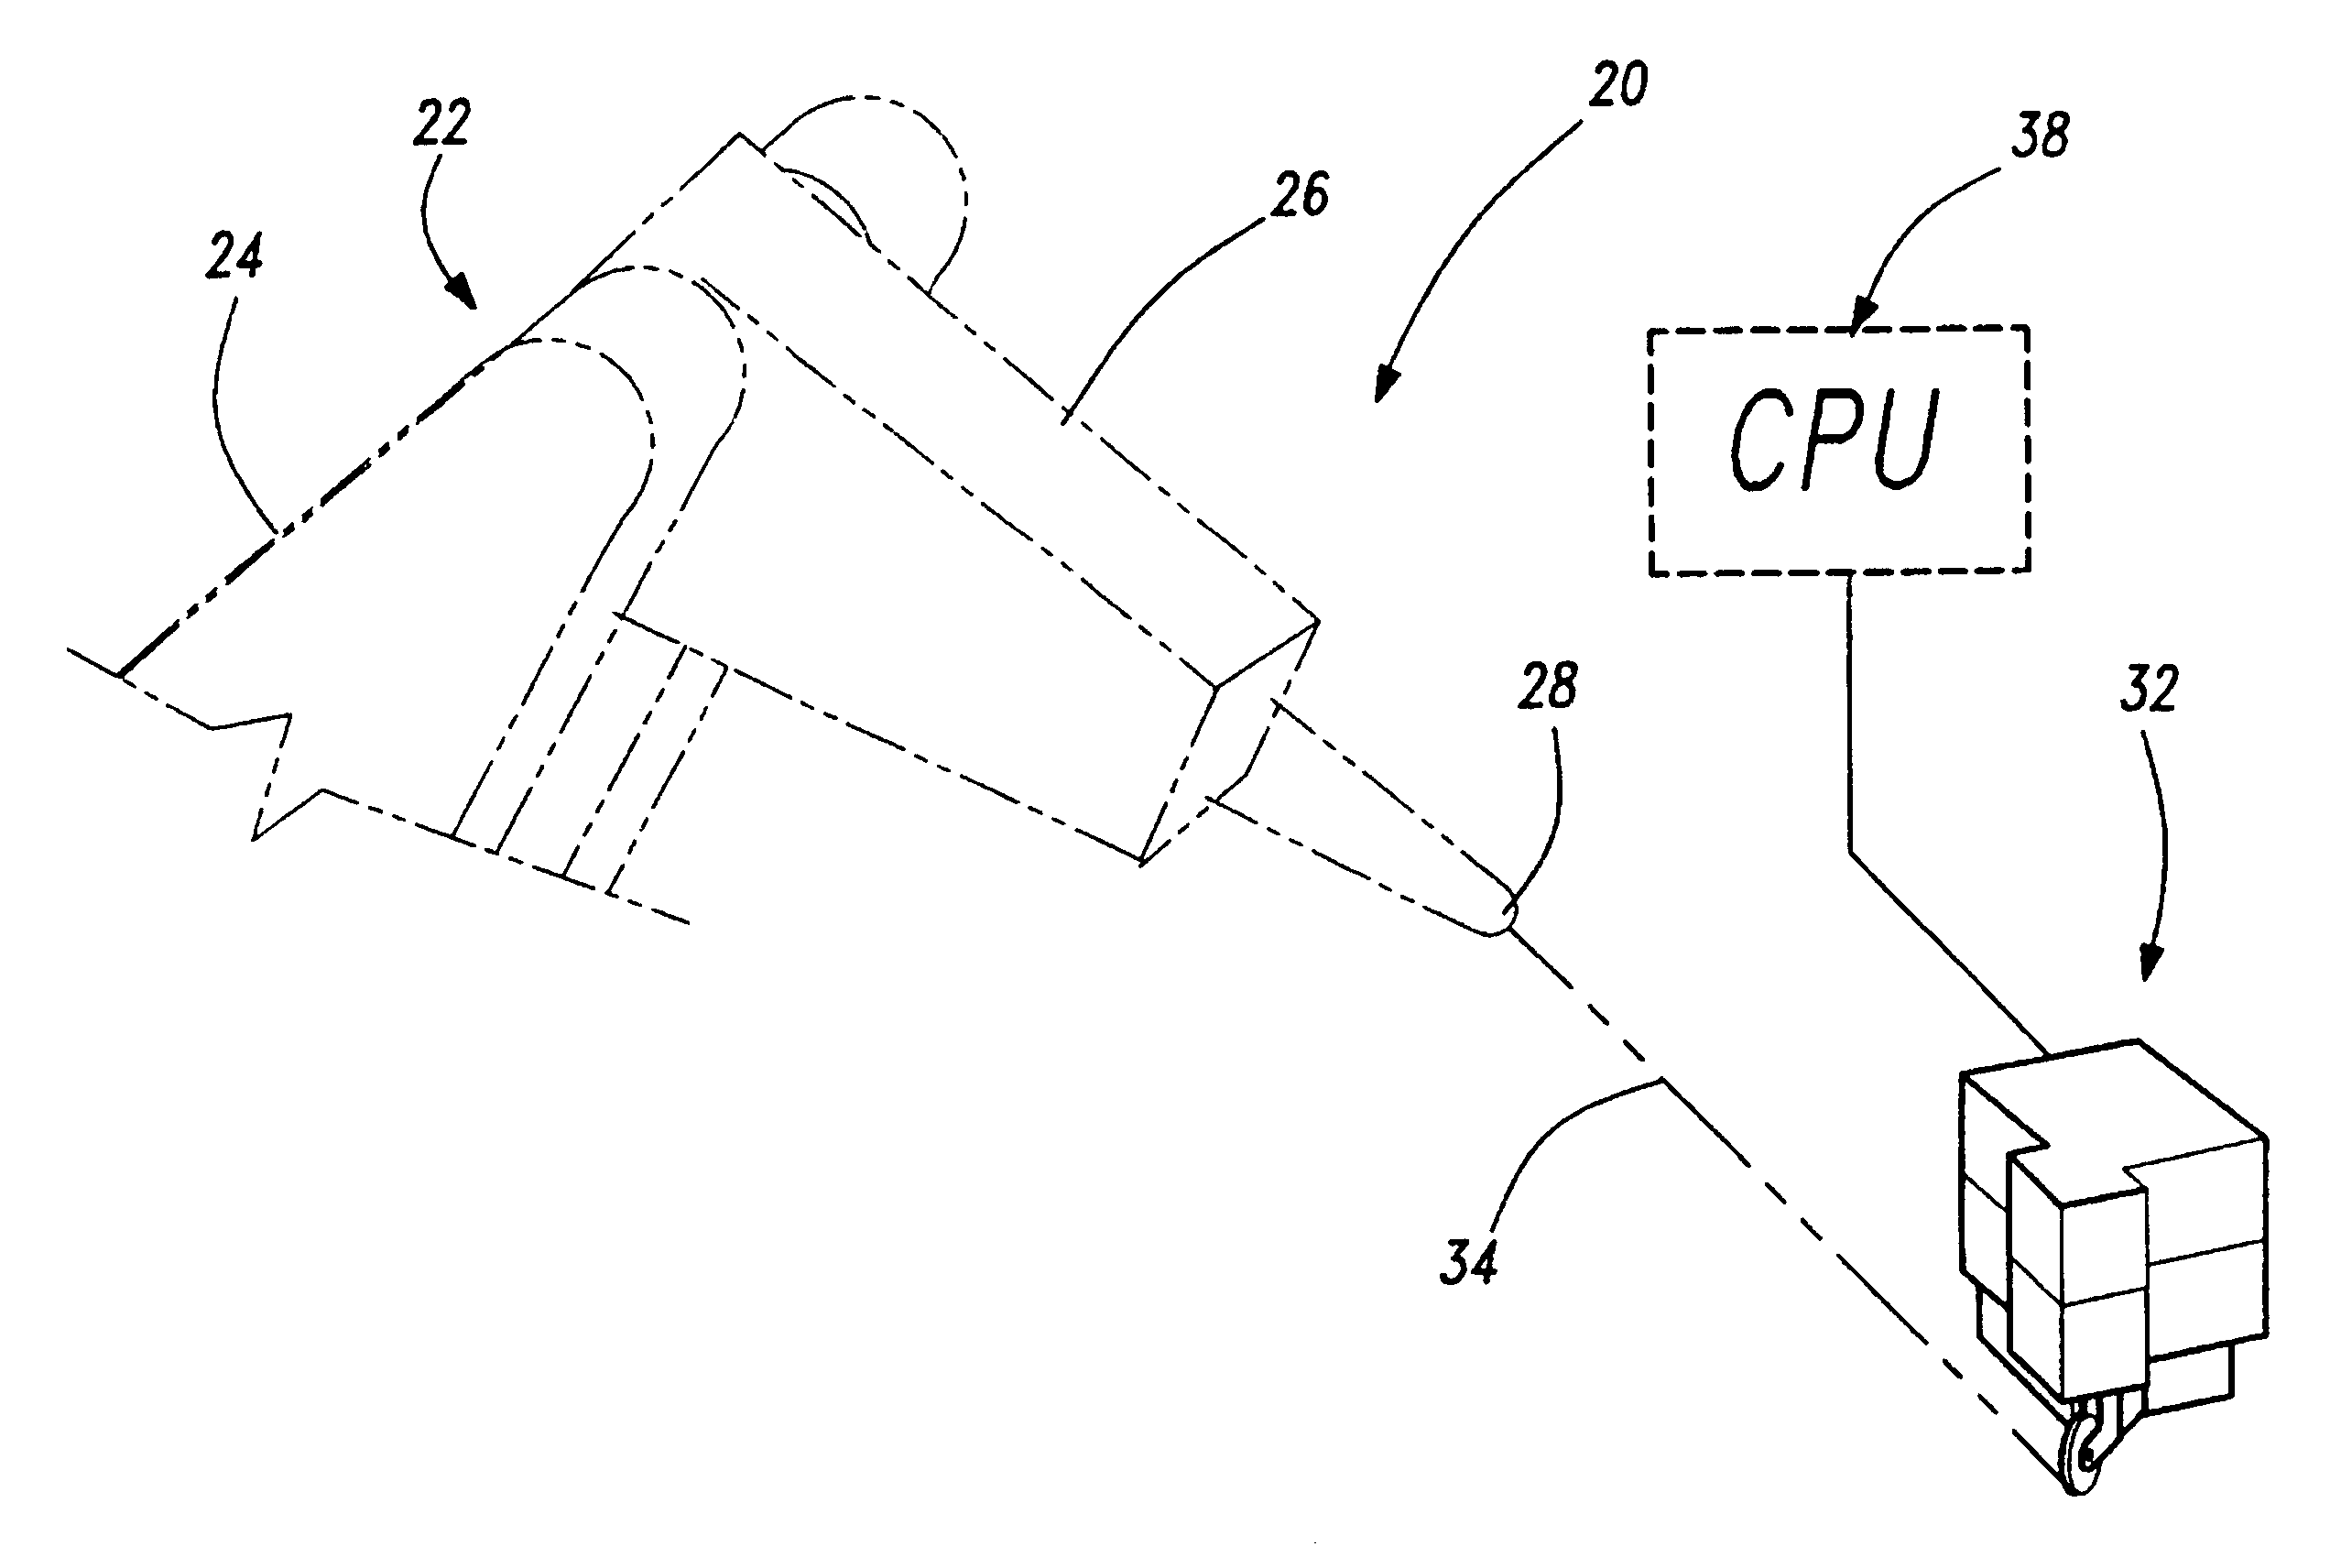 Calibration system and displacement measurement device